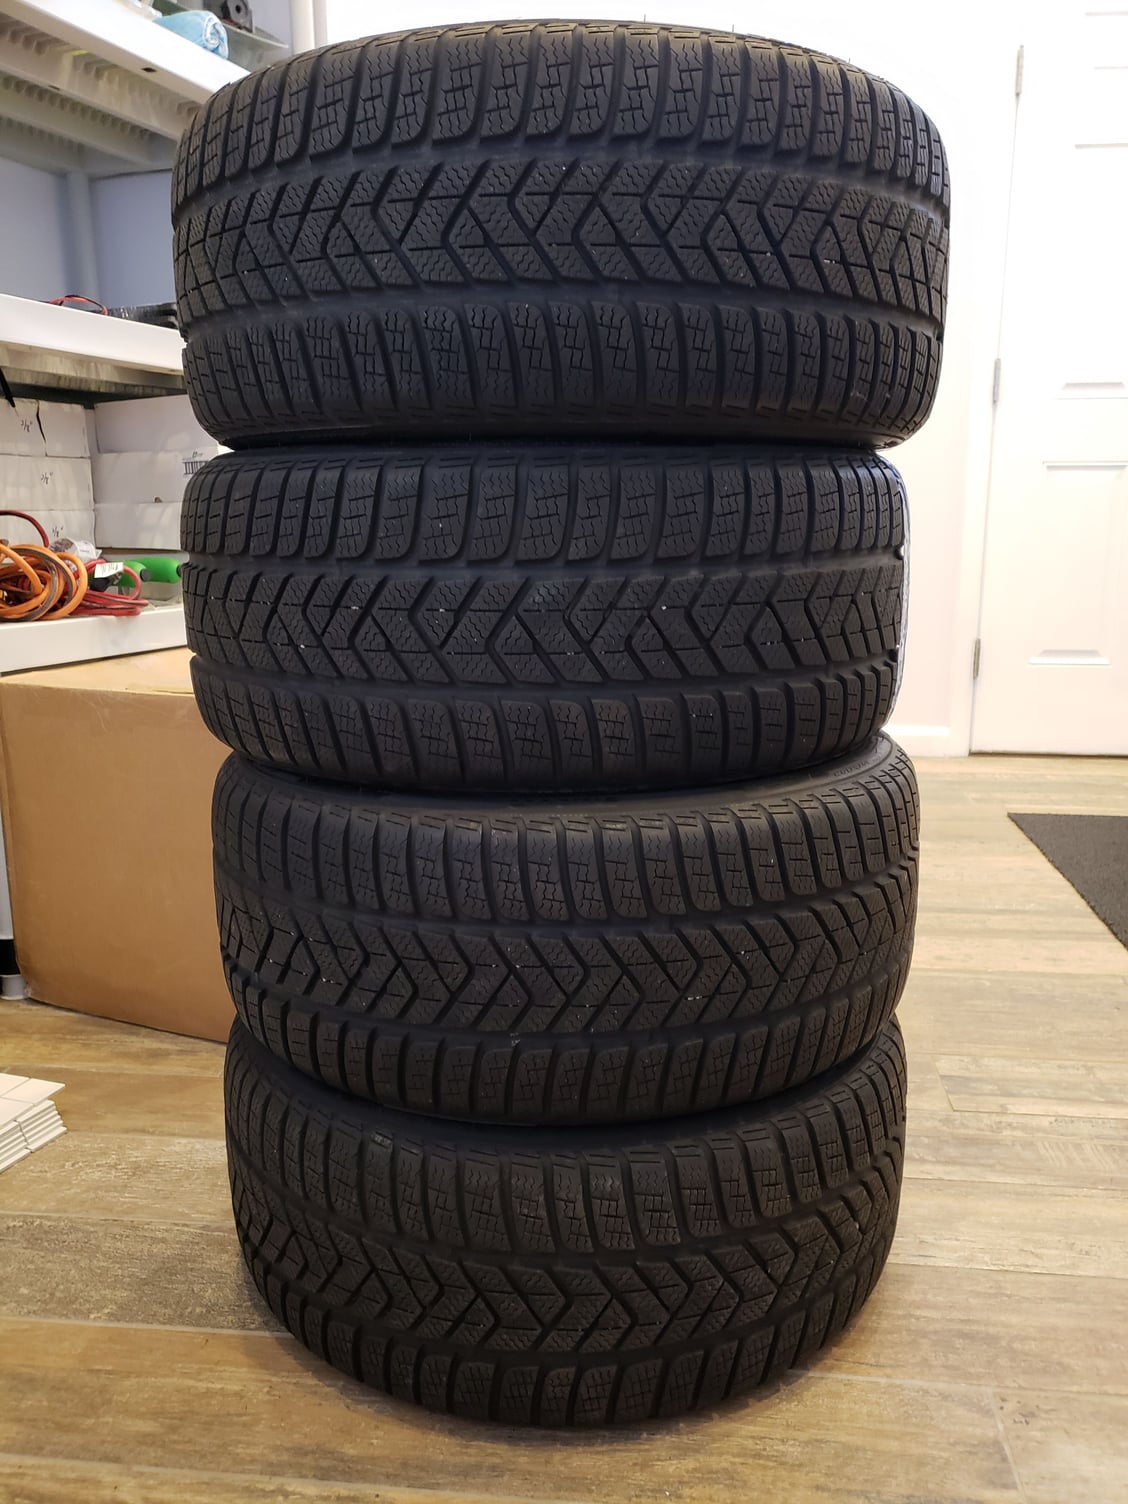 Wheels and Tires/Axles - Winter Tires - Used - All Years Any Make All Models - Collingdale, PA 19023, United States